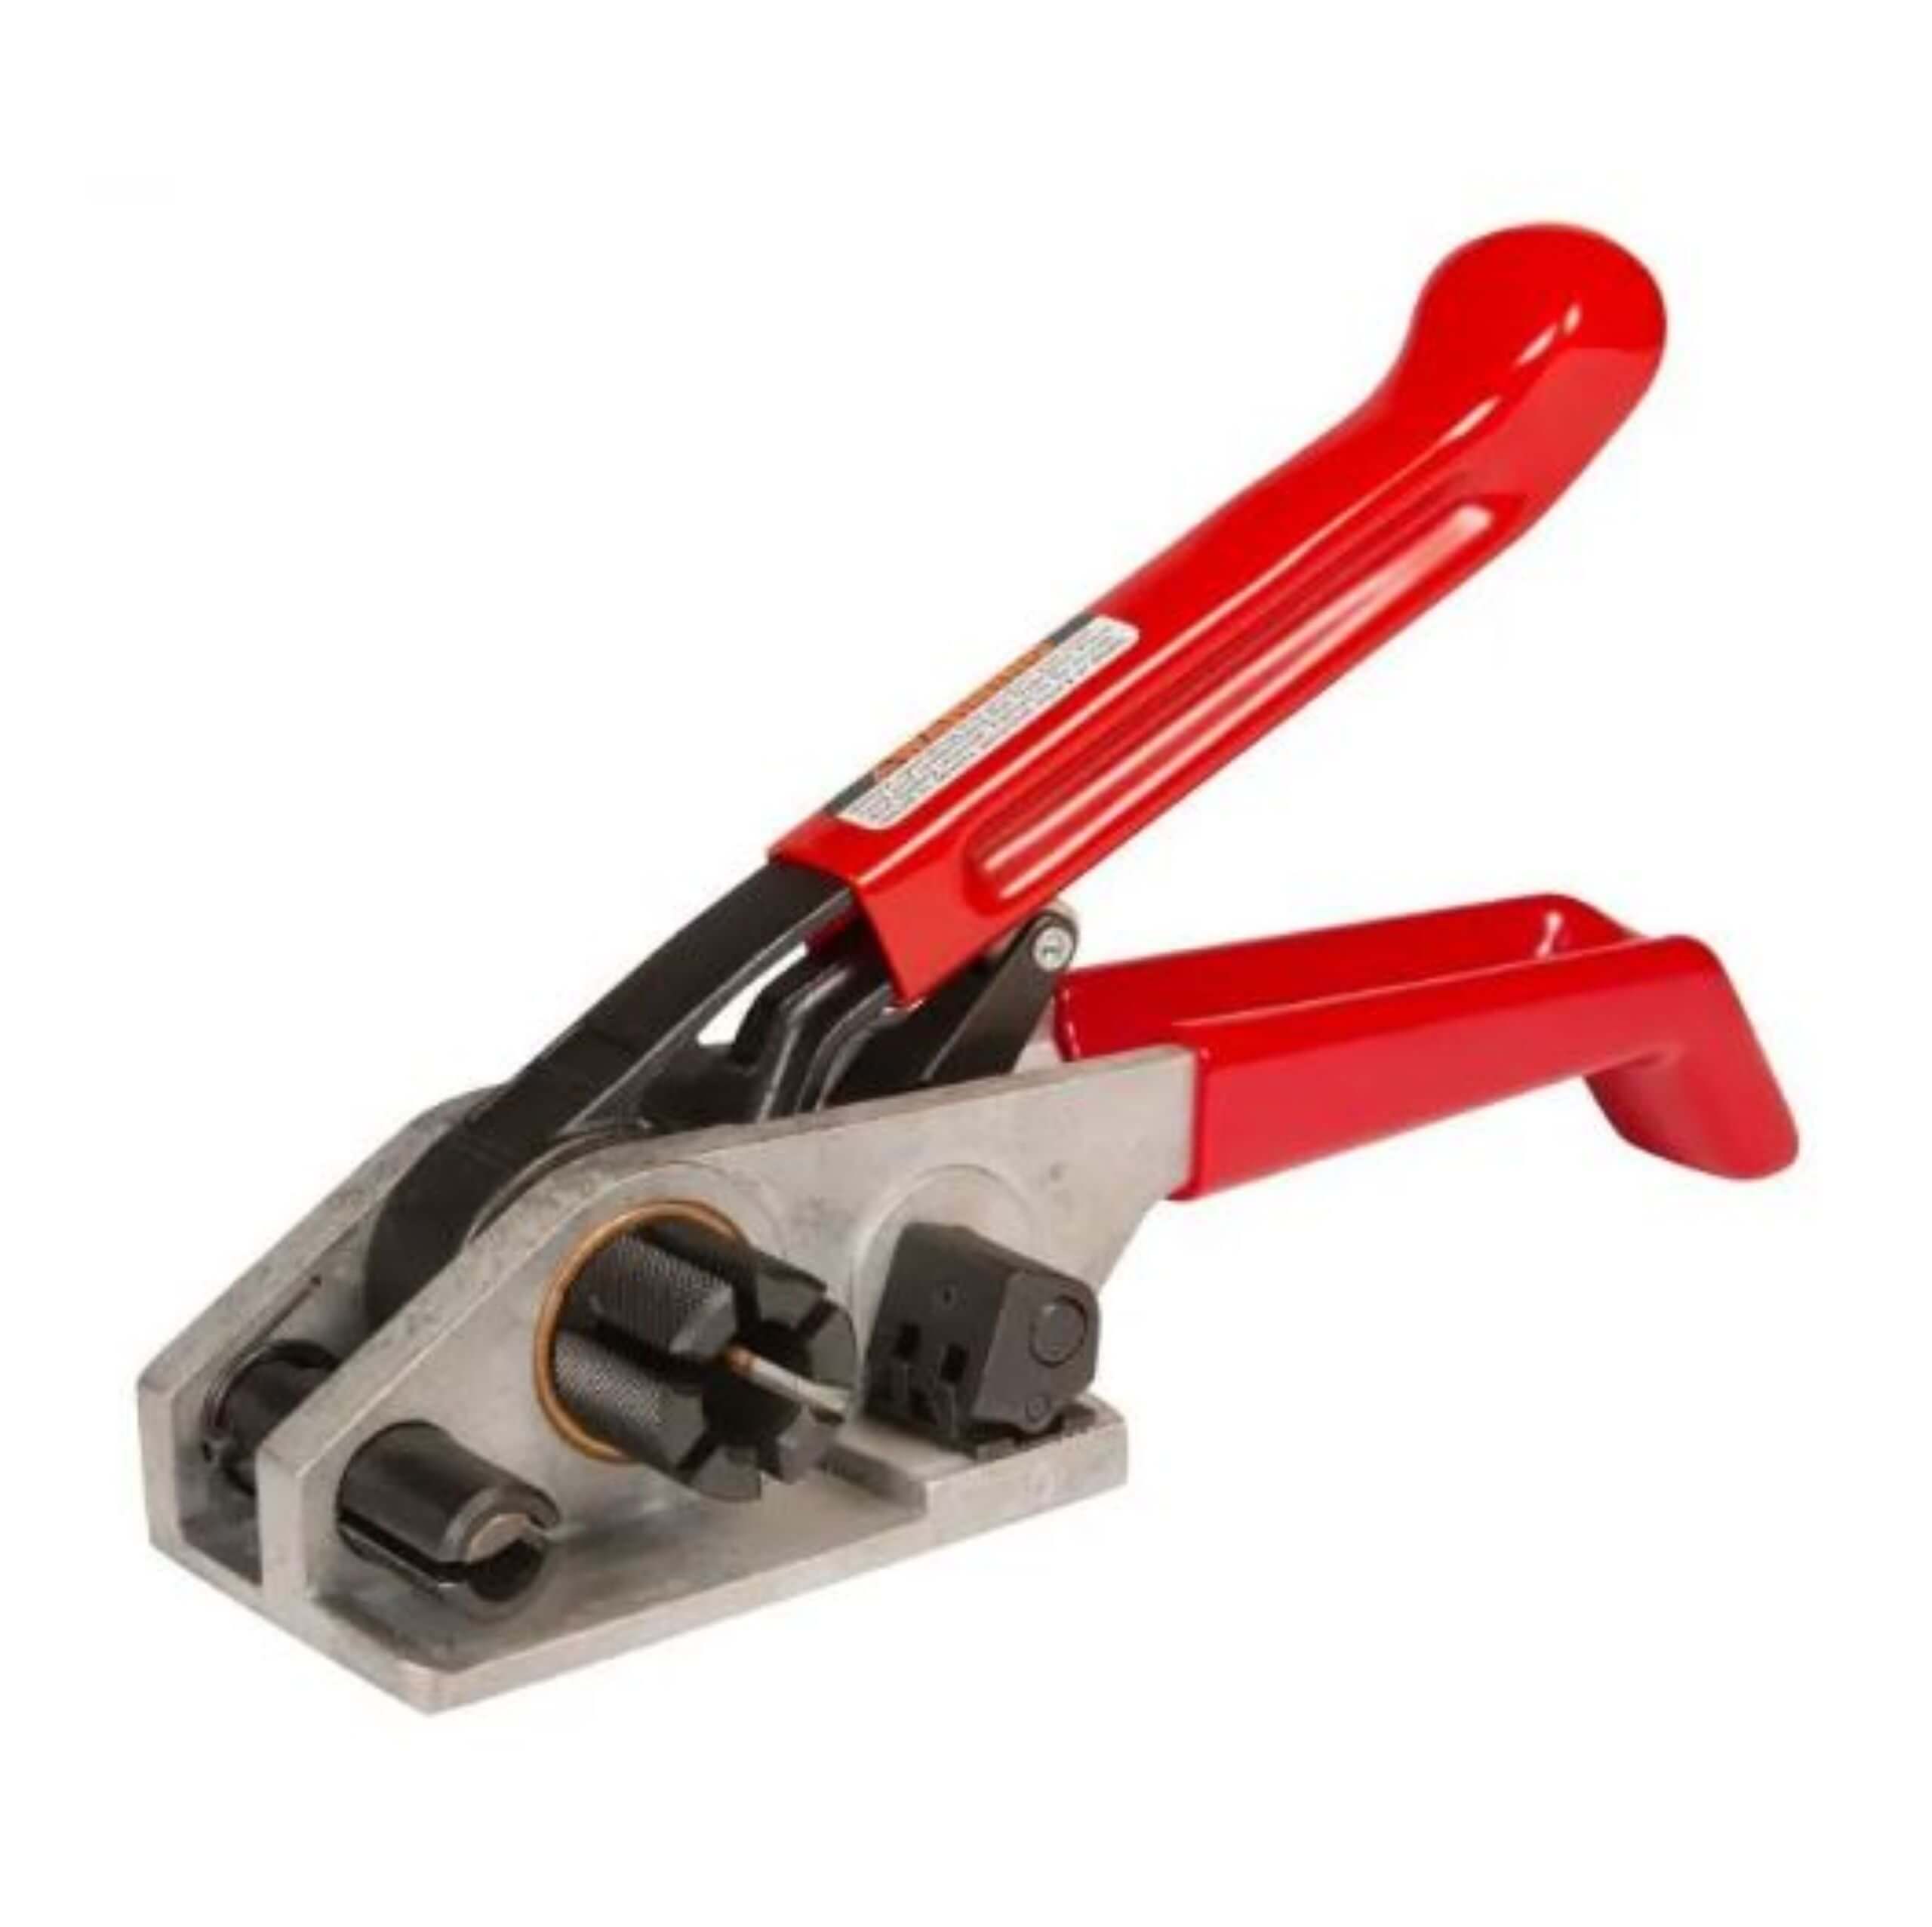 An image of our standard Strapping Tensioner Tools.